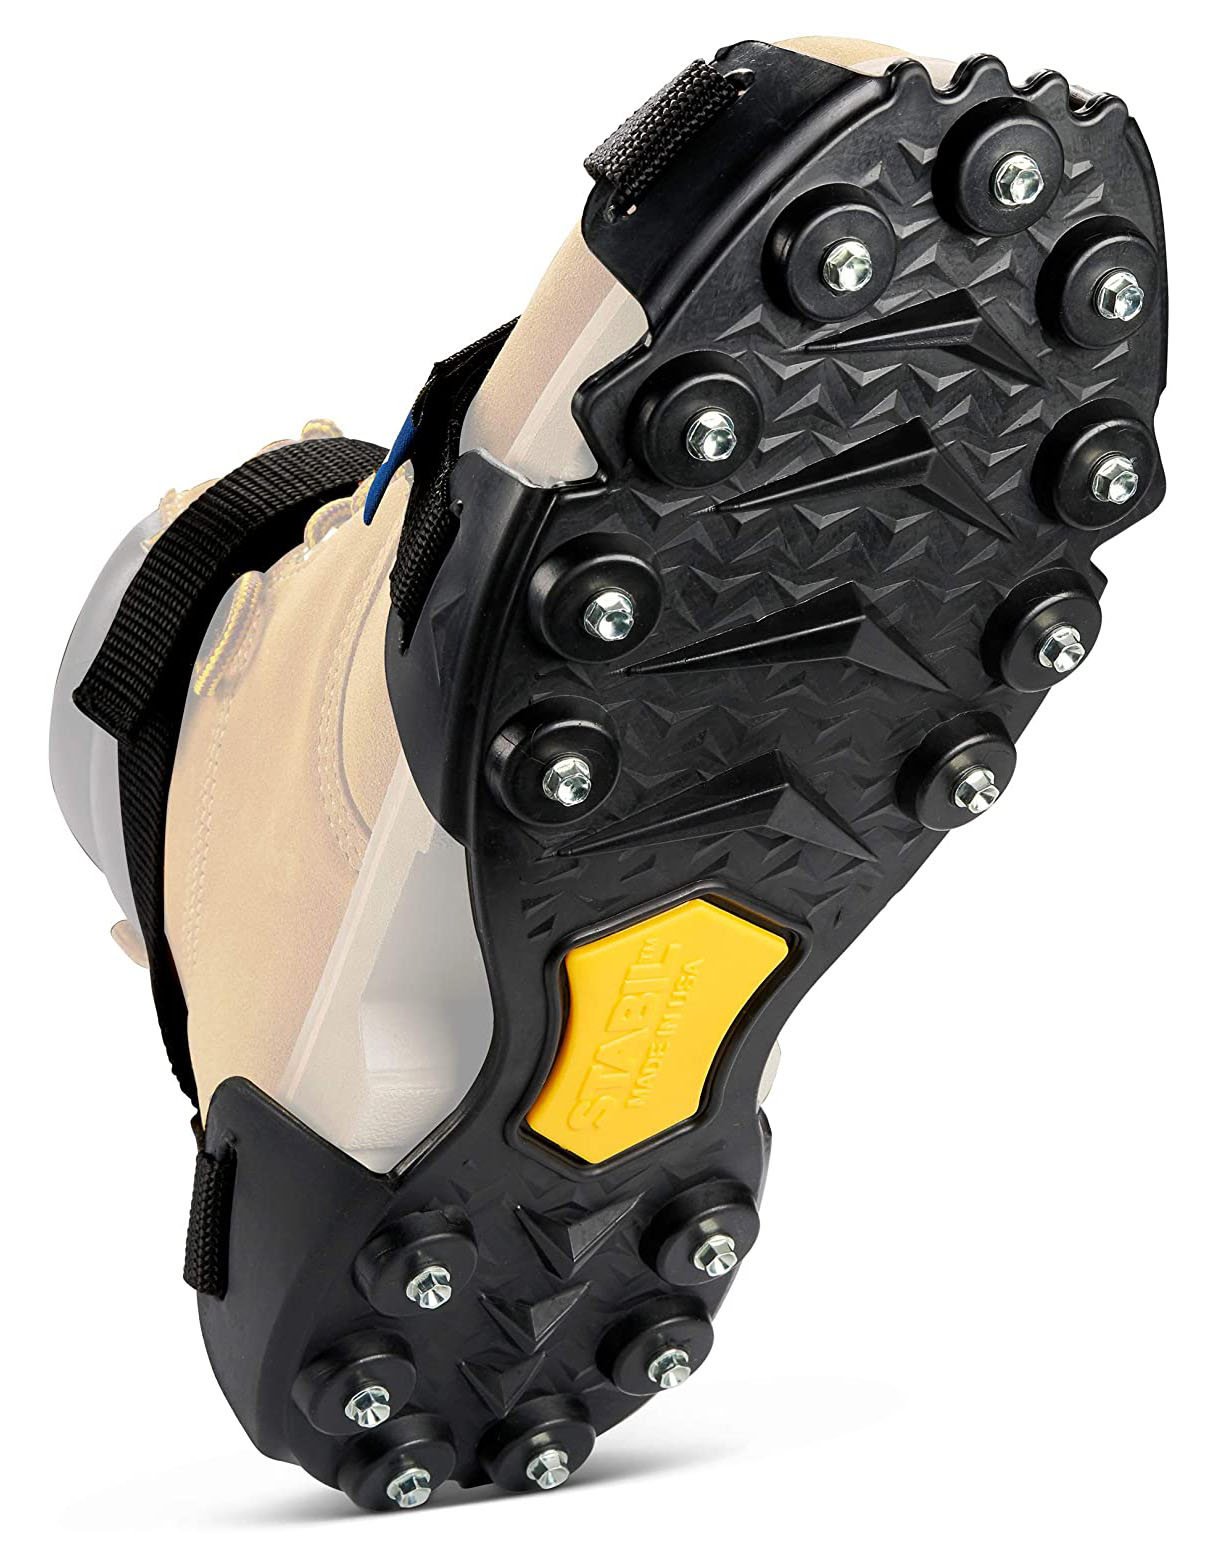 STABILicers Maxx 2 traction device